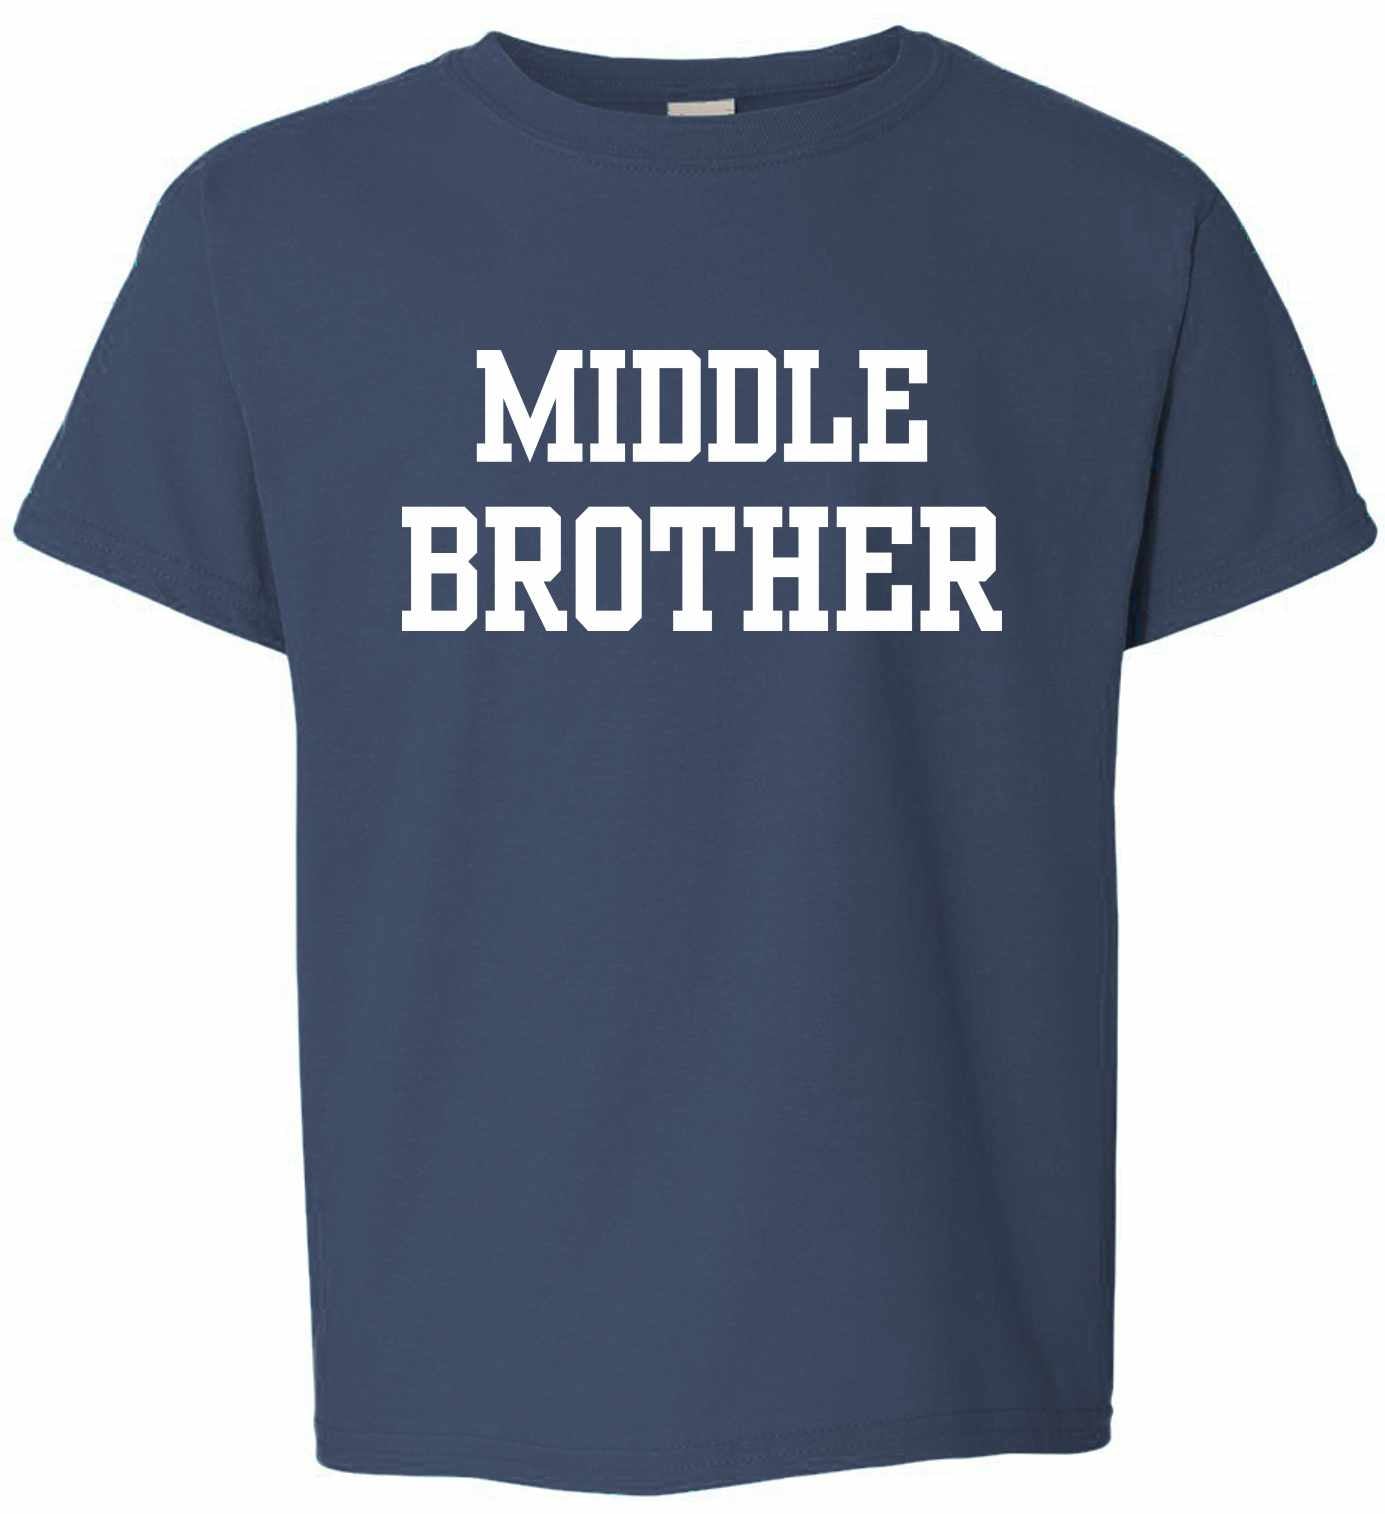 MIDDLE BROTHER on Kids T-Shirt (#1112-201)